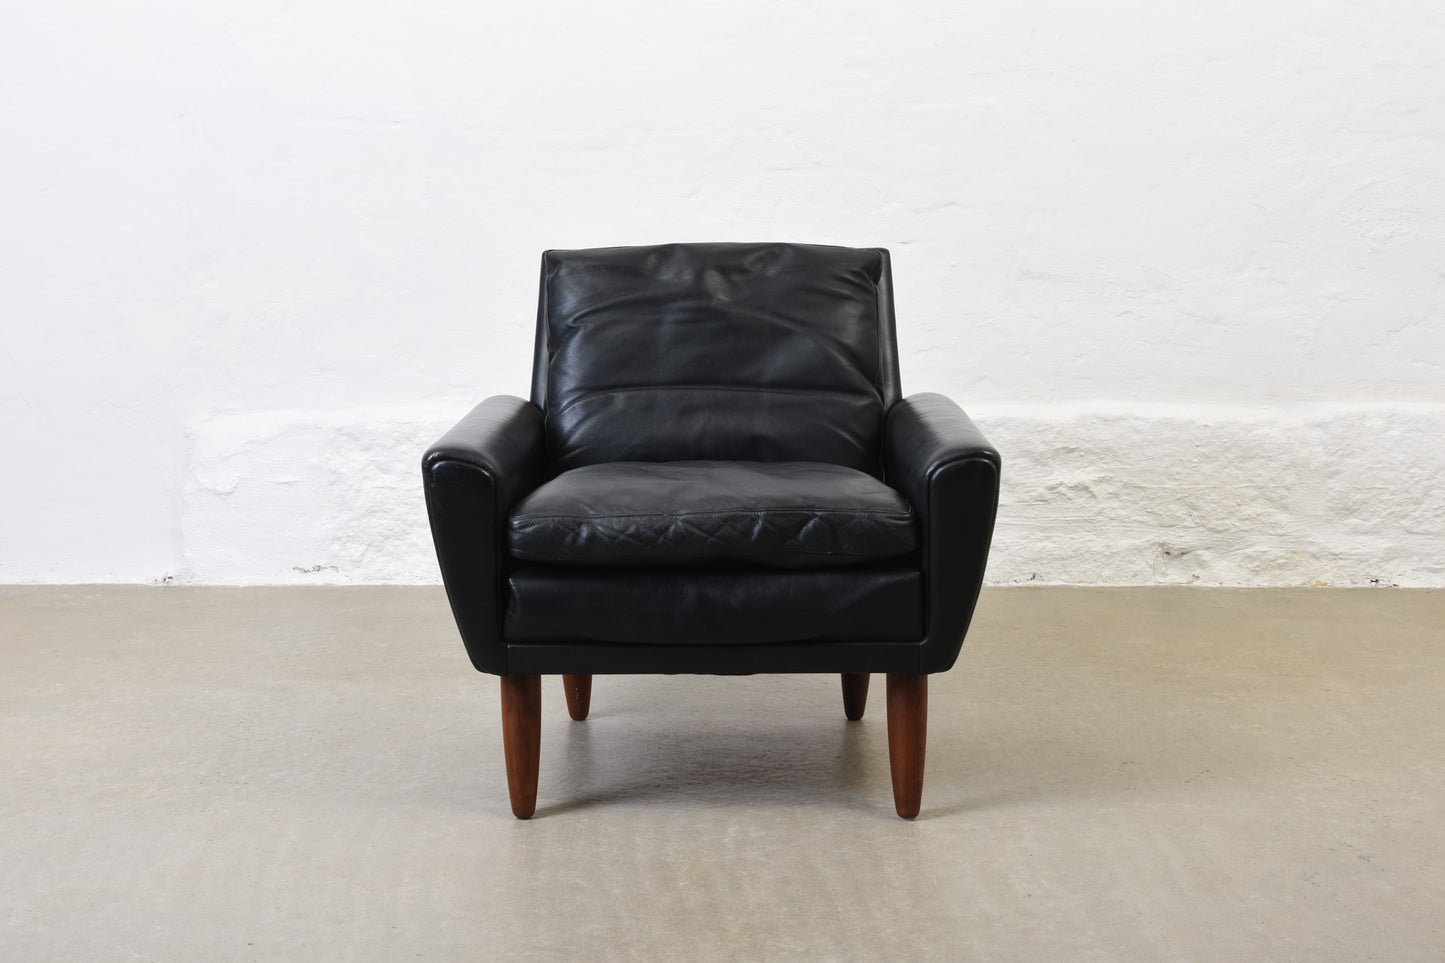 1960s leather lounger by G. Thams